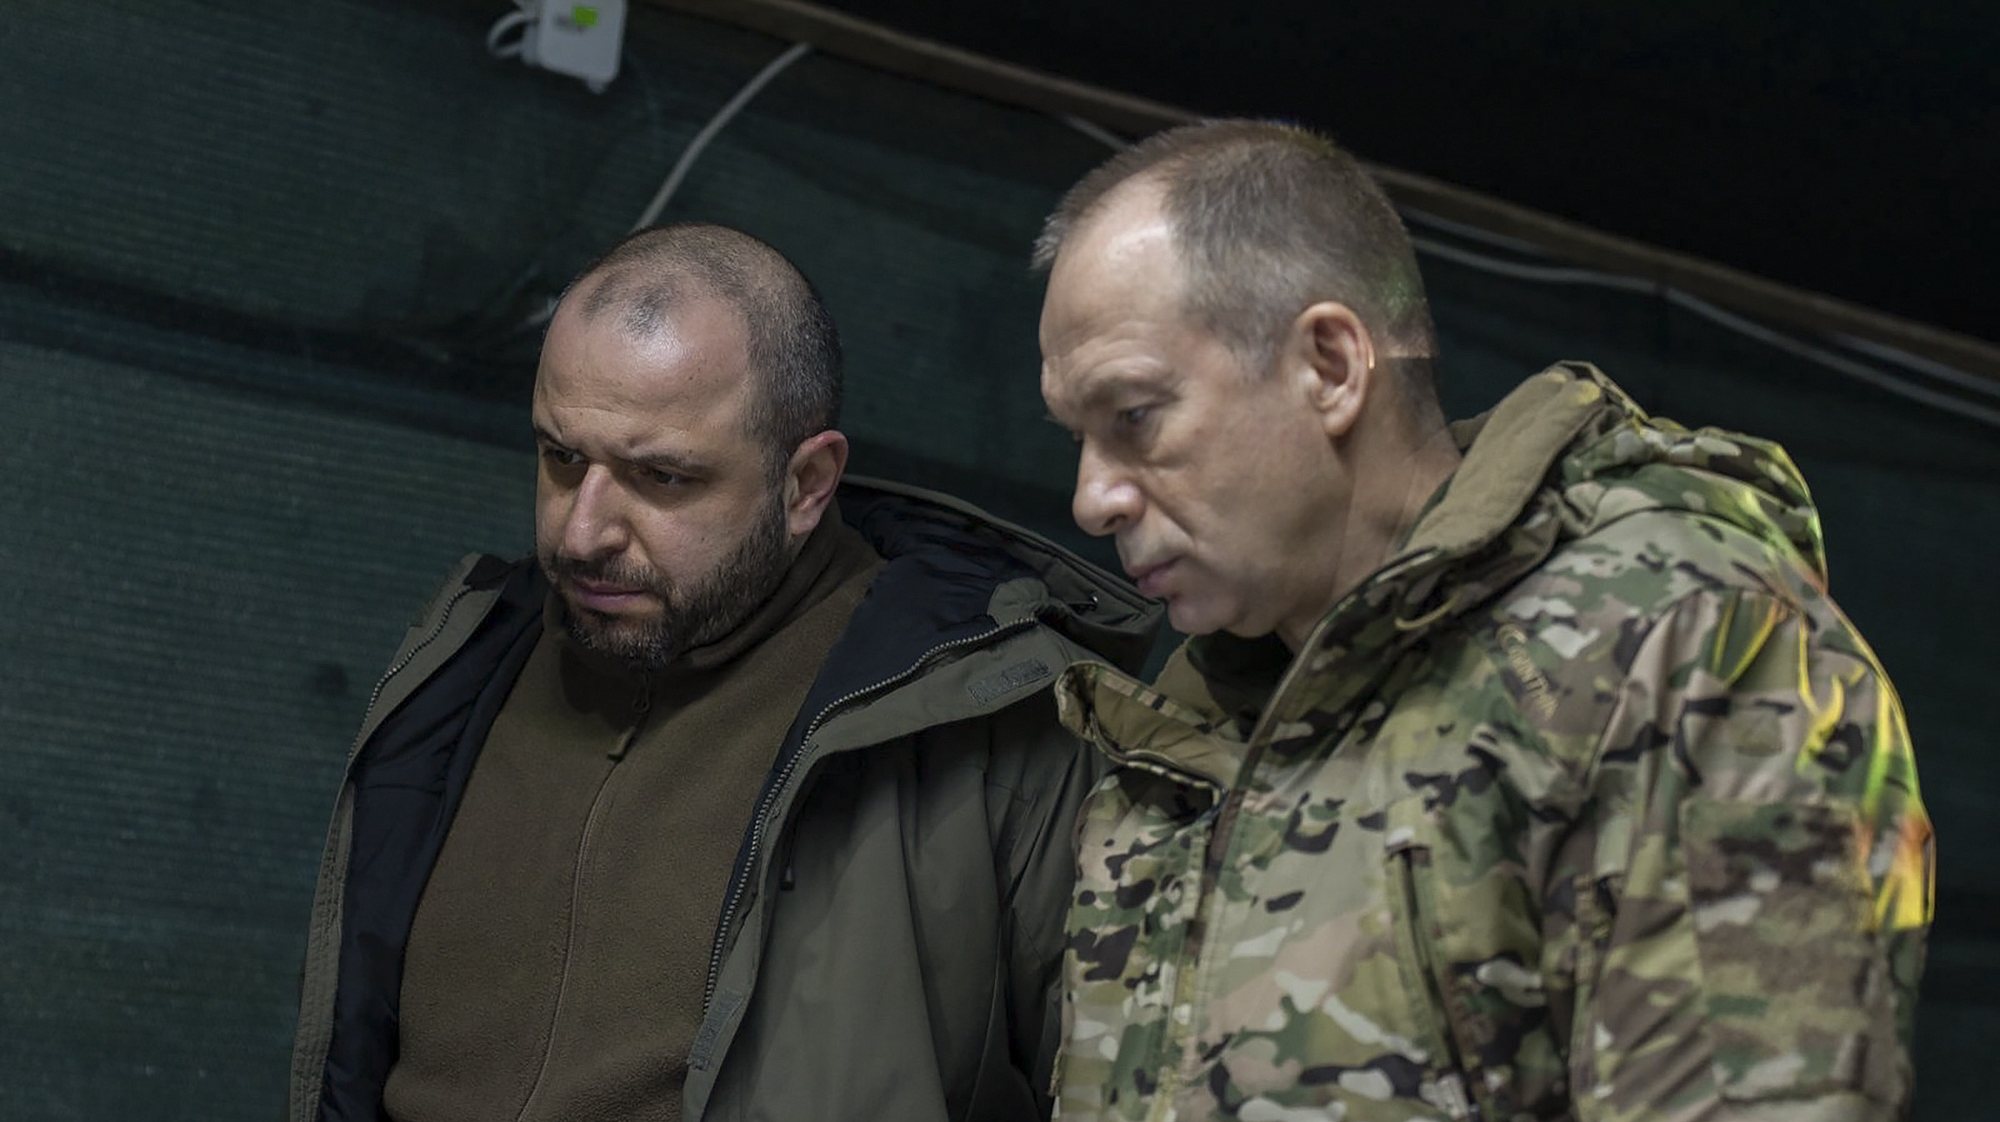 epa11152471 A handout picture made available by the Defense Ministry’s press service shows Ukrainian Defense Minister Rustem Umerov (L) and Commander-in-Chief of the Armed Forces of Ukraine Oleksandr Syrskyi (R), visiting the frontline at an undisclosed location in the Donetsk area, Ukraine, 14 February 2024. Syrskyi and Umerov visited the command posts at the frontline near Avdiivka in the Donetsk area and Kupiansk in the Kharkiv area.  EPA/DEFENSE MINISTRY HANDOUT   HANDOUT EDITORIAL USE ONLY/NO SALES HANDOUT EDITORIAL USE ONLY/NO SALES